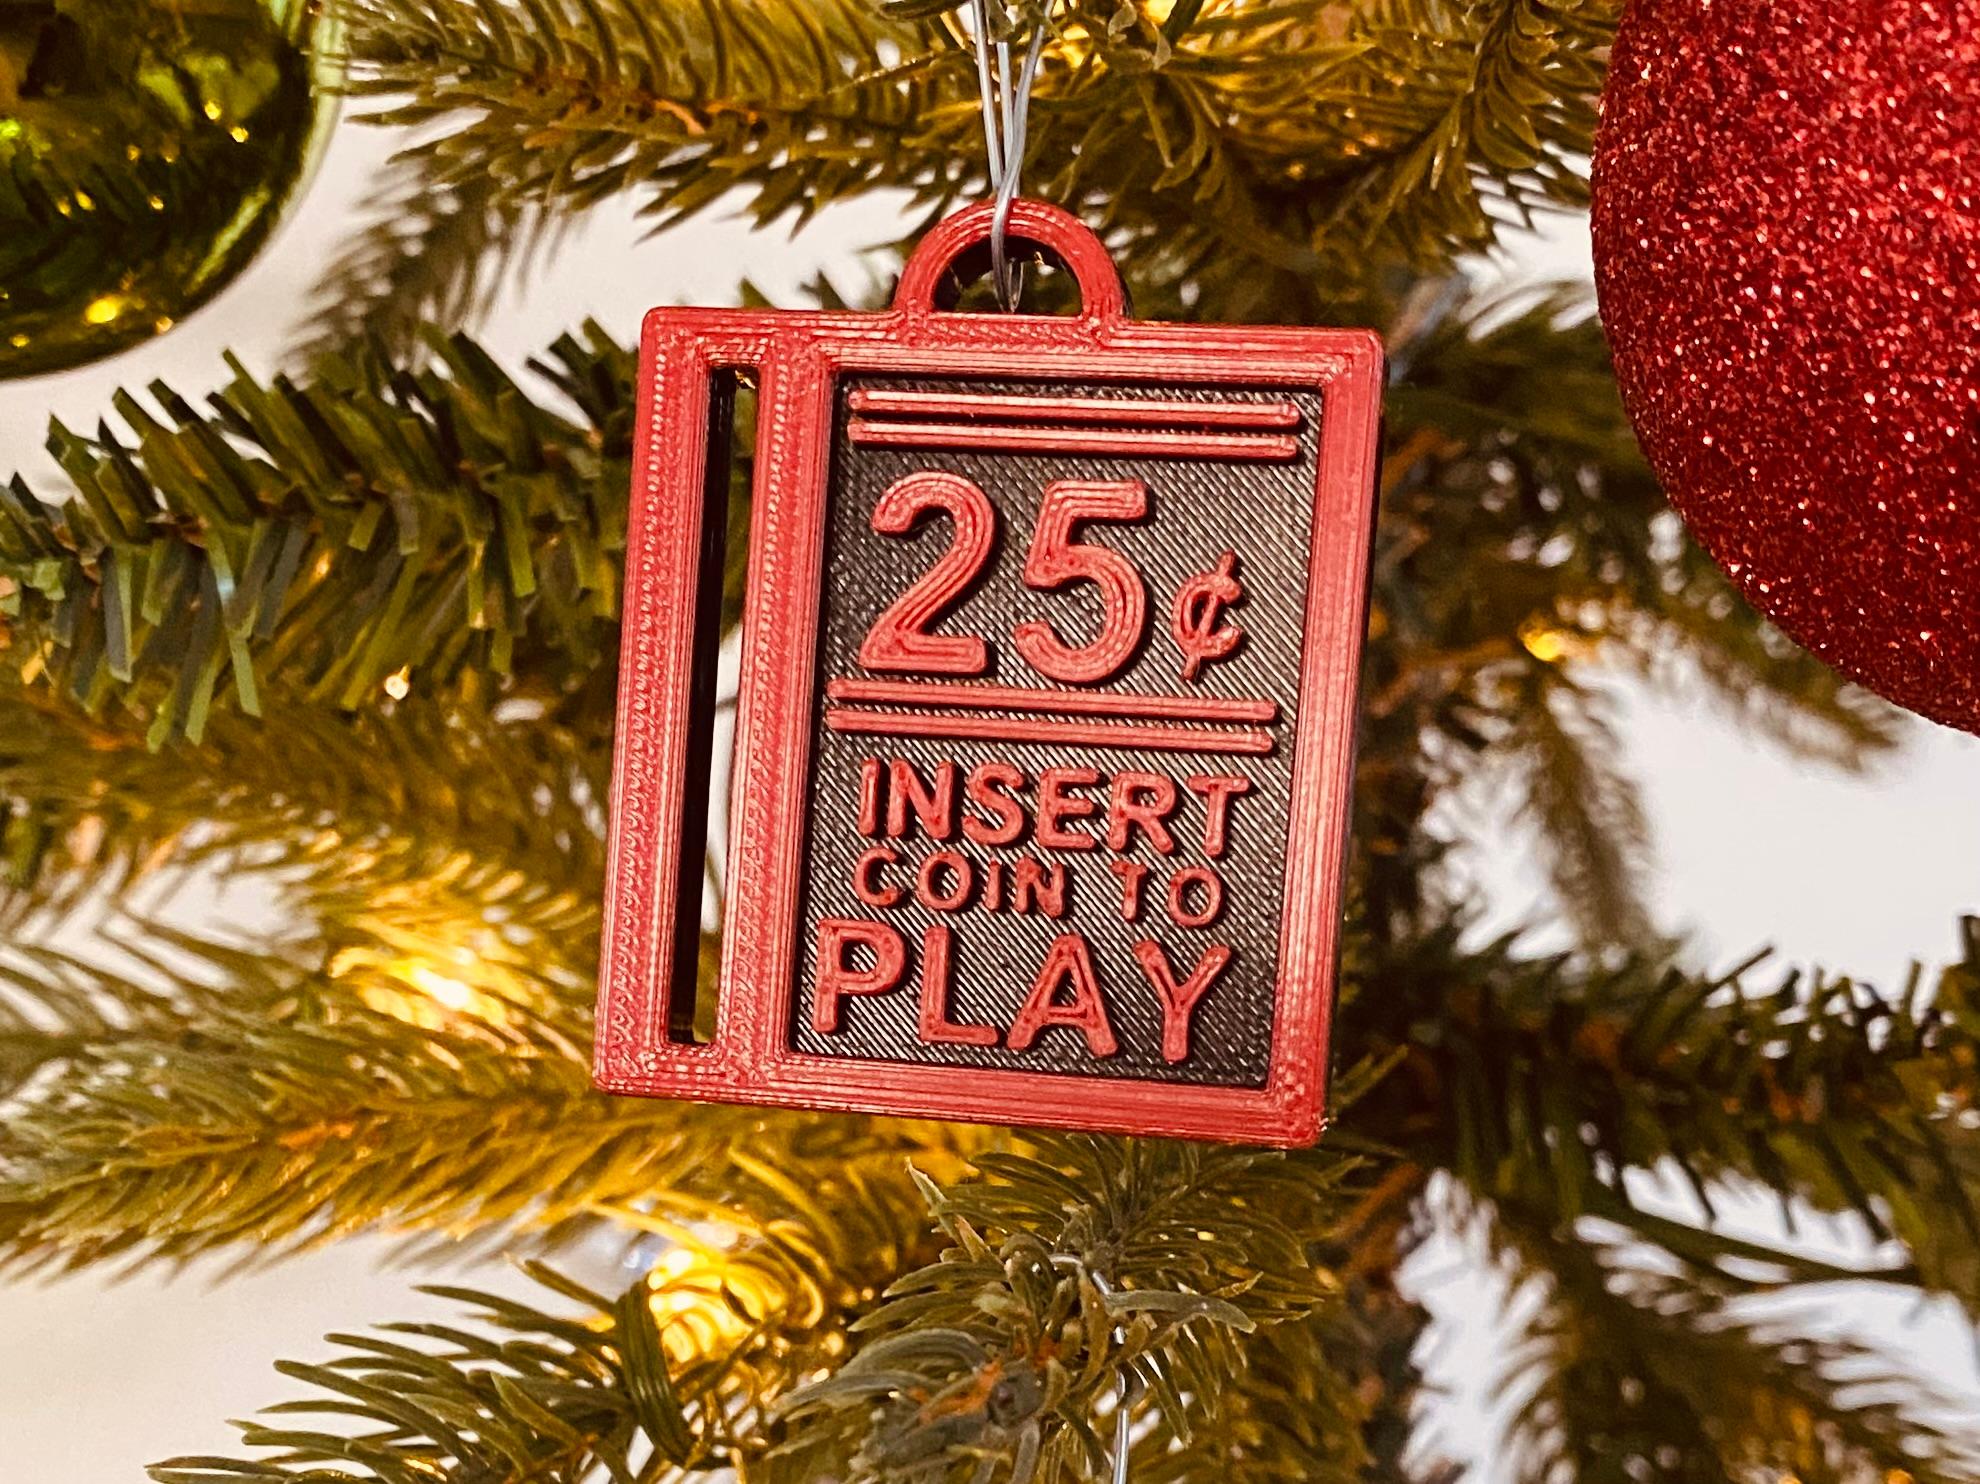 Insert Coin To Play Ornament 3d model